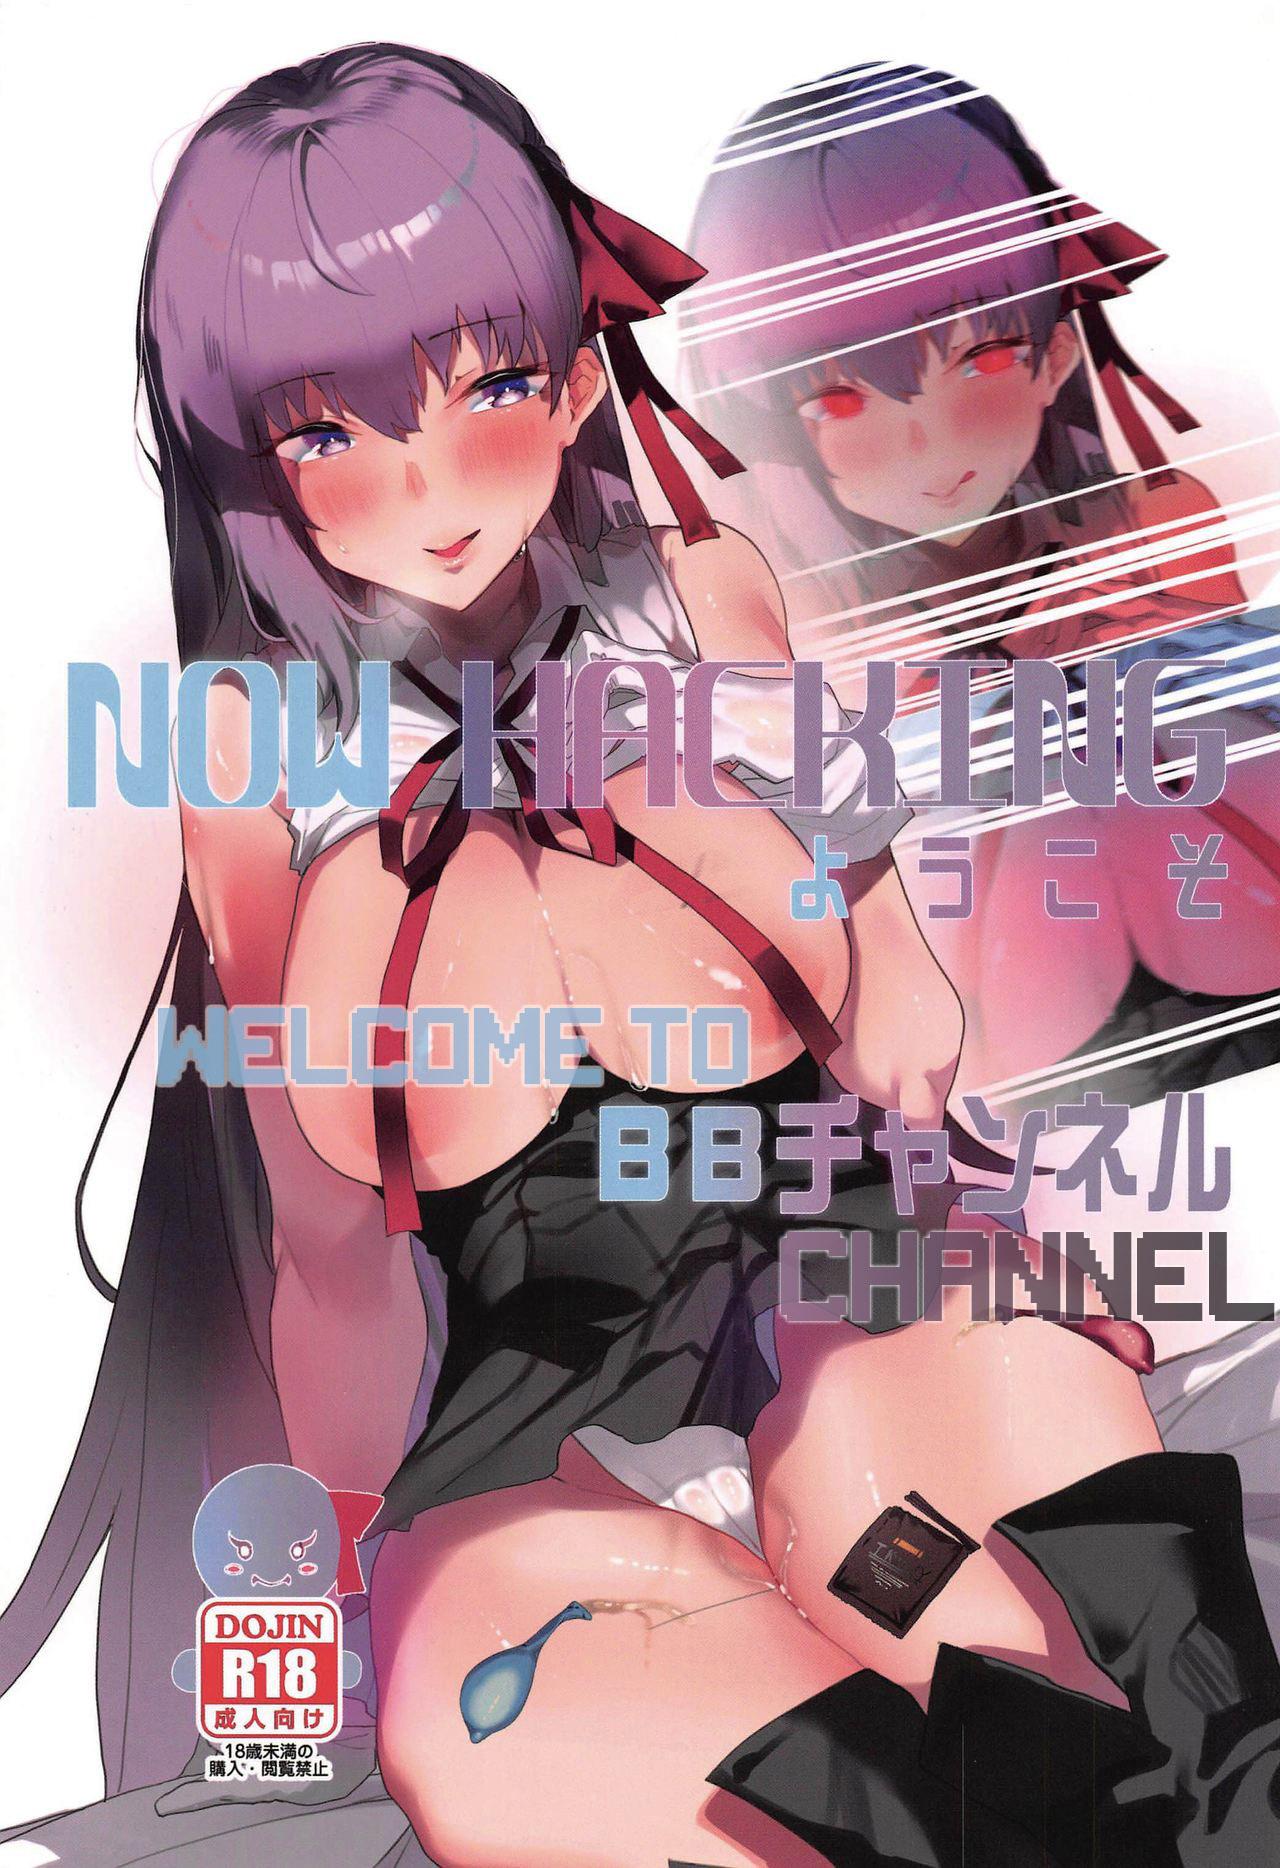 NOW HACKING Youkoso BB Channel 0